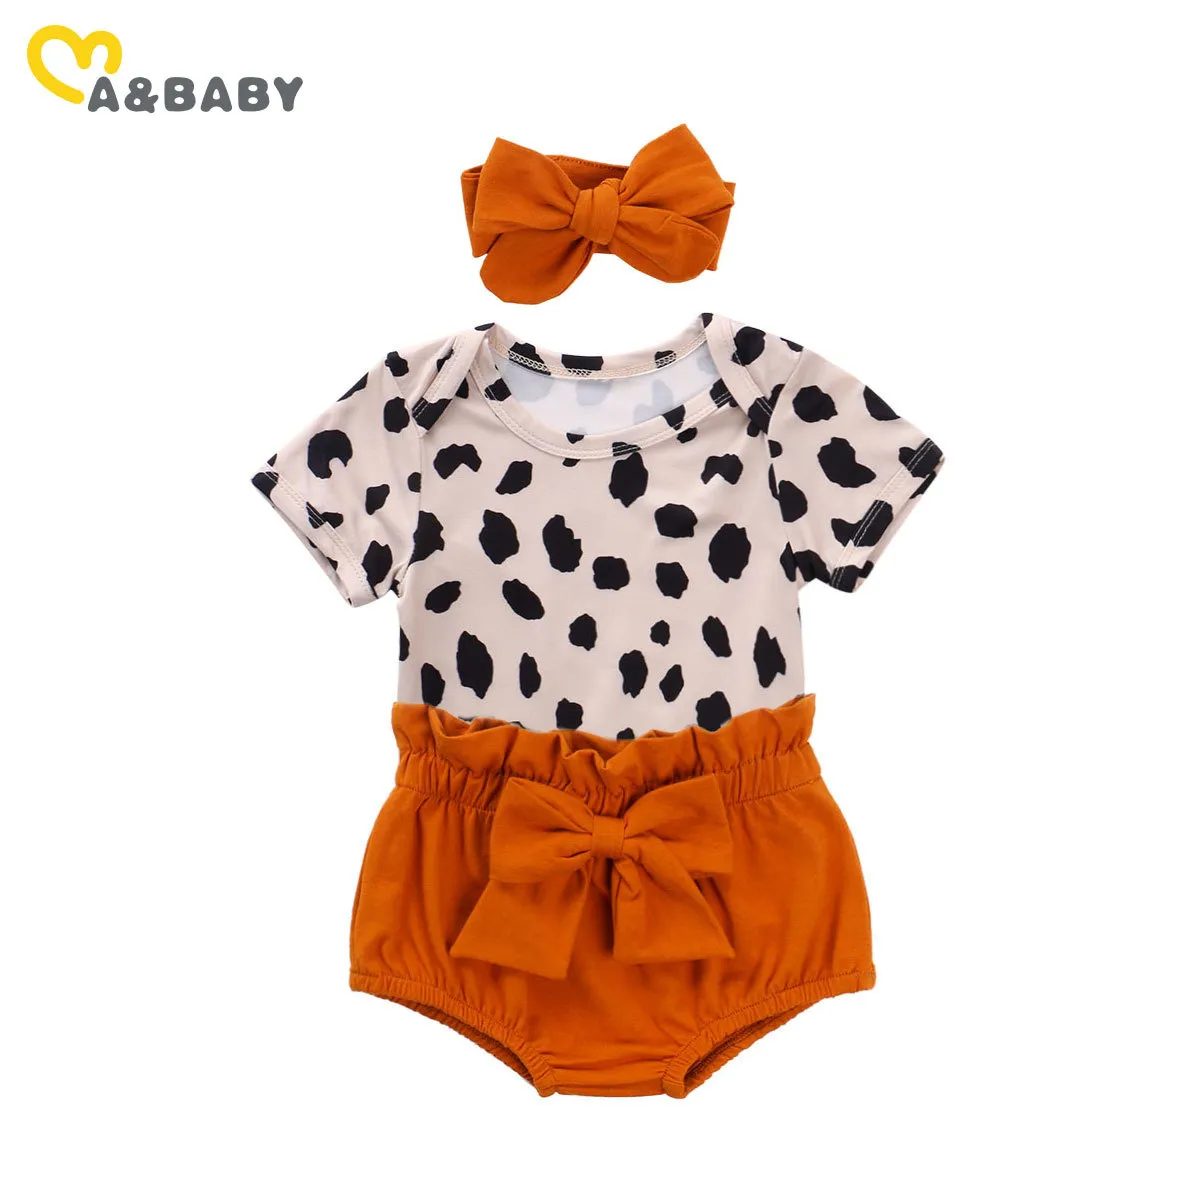 0-24M Estate nata Toddler Baby Girl Clothes Set Leopard Pagliaccetto Top Bow Shorts Fascia Outfit Costumi 210515